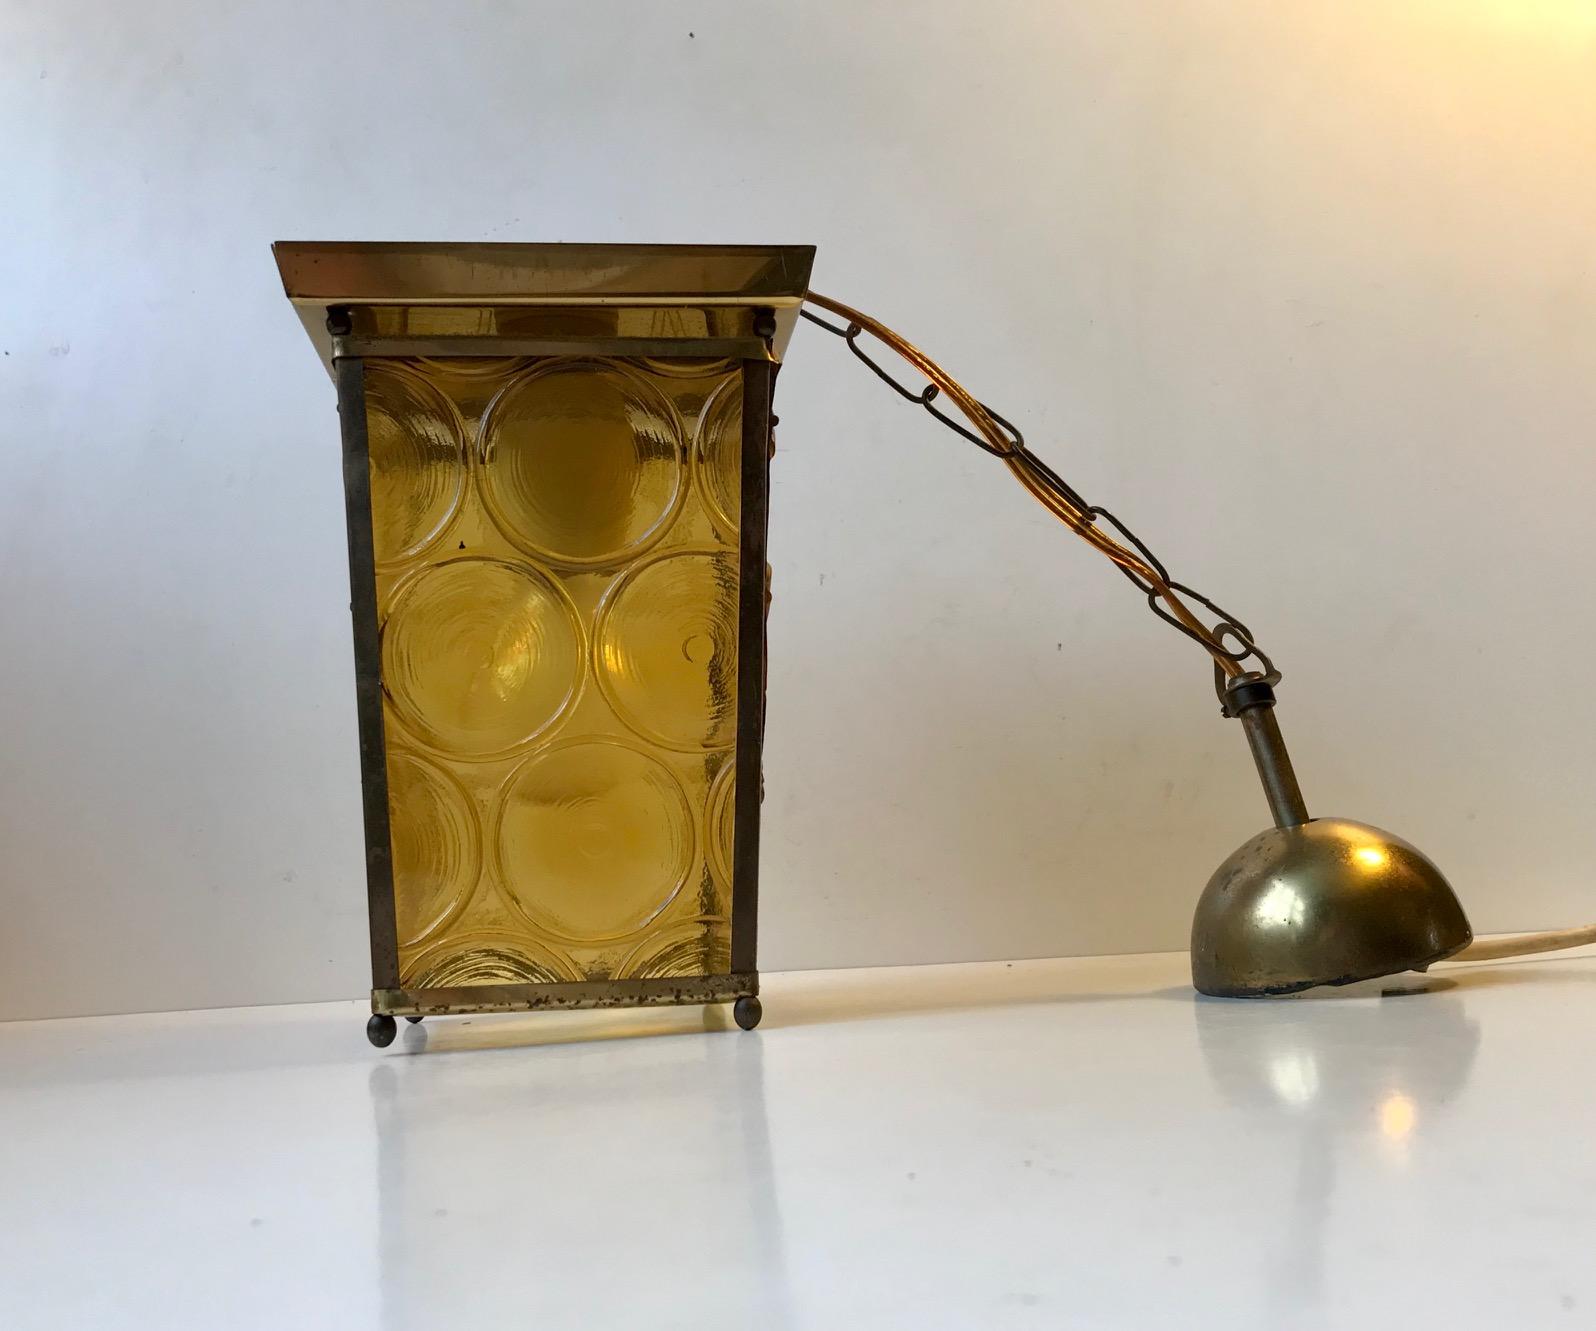 Partially Caged functionalist flush mount or ceiling lamp with yellow glass panels. Manufactured in Denmark during the 1950s, probably by either Voss or Lyfa. This light can be used as a low table lamp as well. It has a bakelit fitting and its